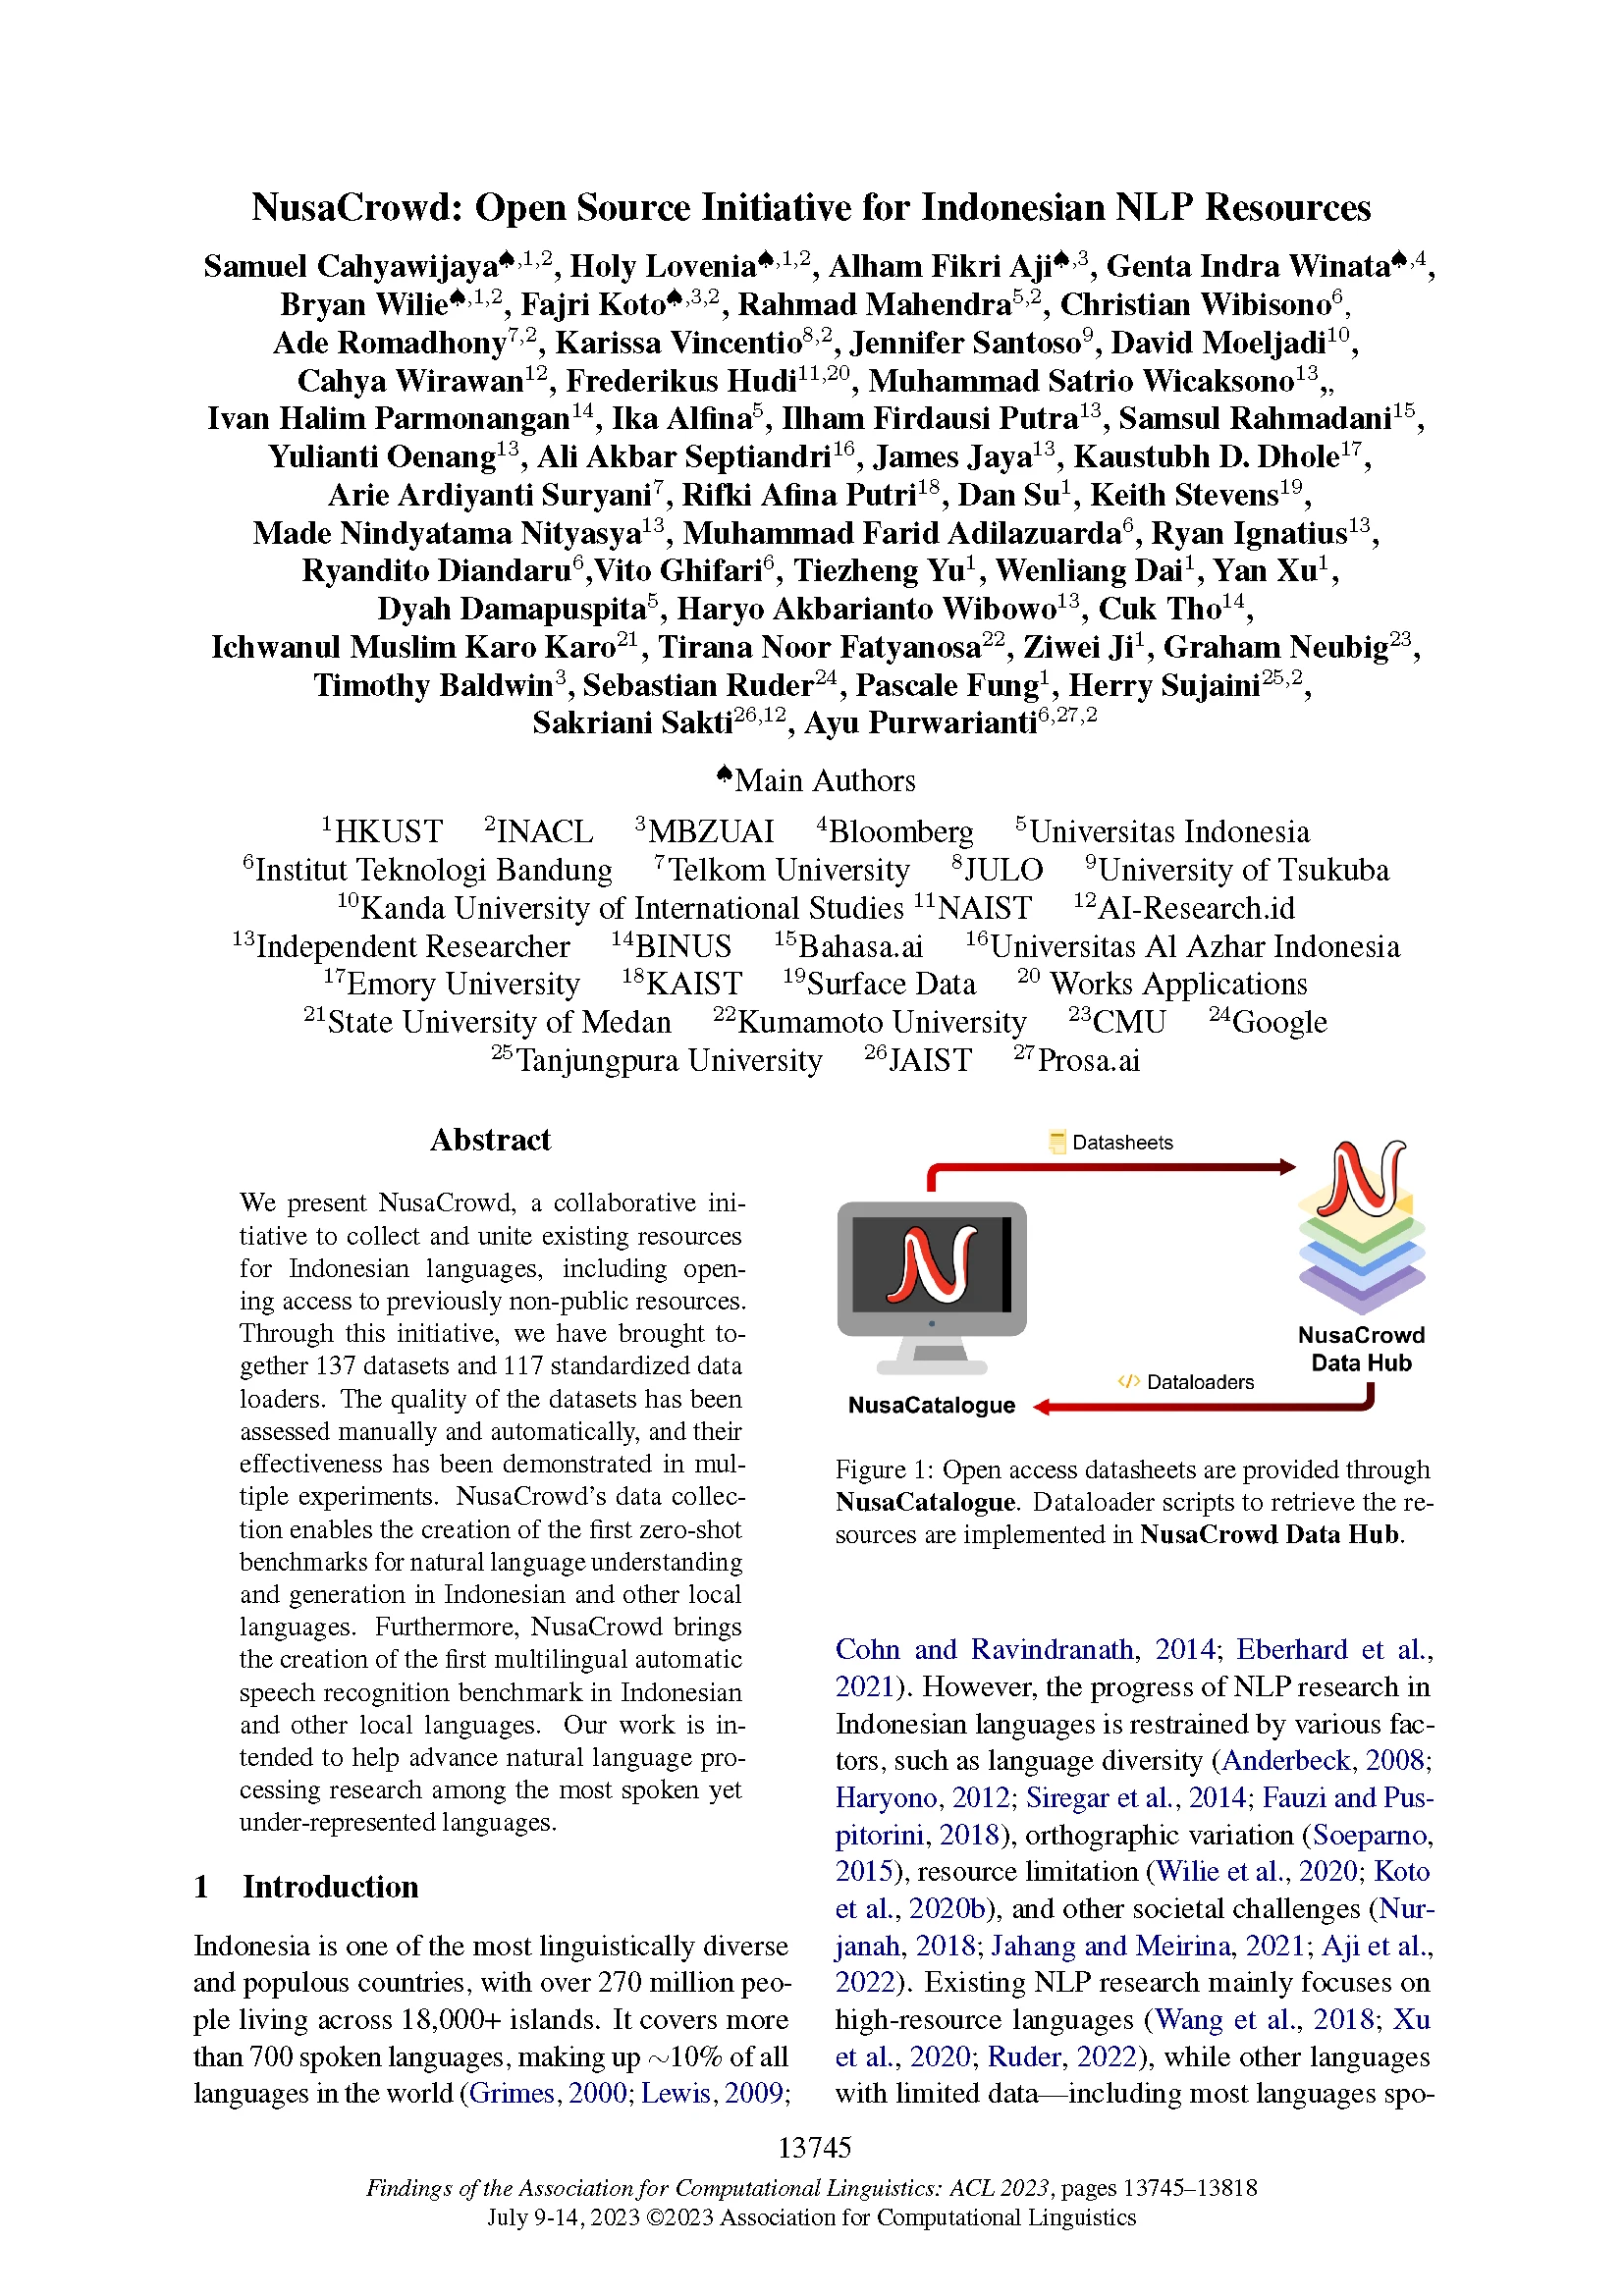 Front page of Findings of the ACL 2023 paper "NusaCrowd: Open Source Initiative for Indonesian NLP Resources"